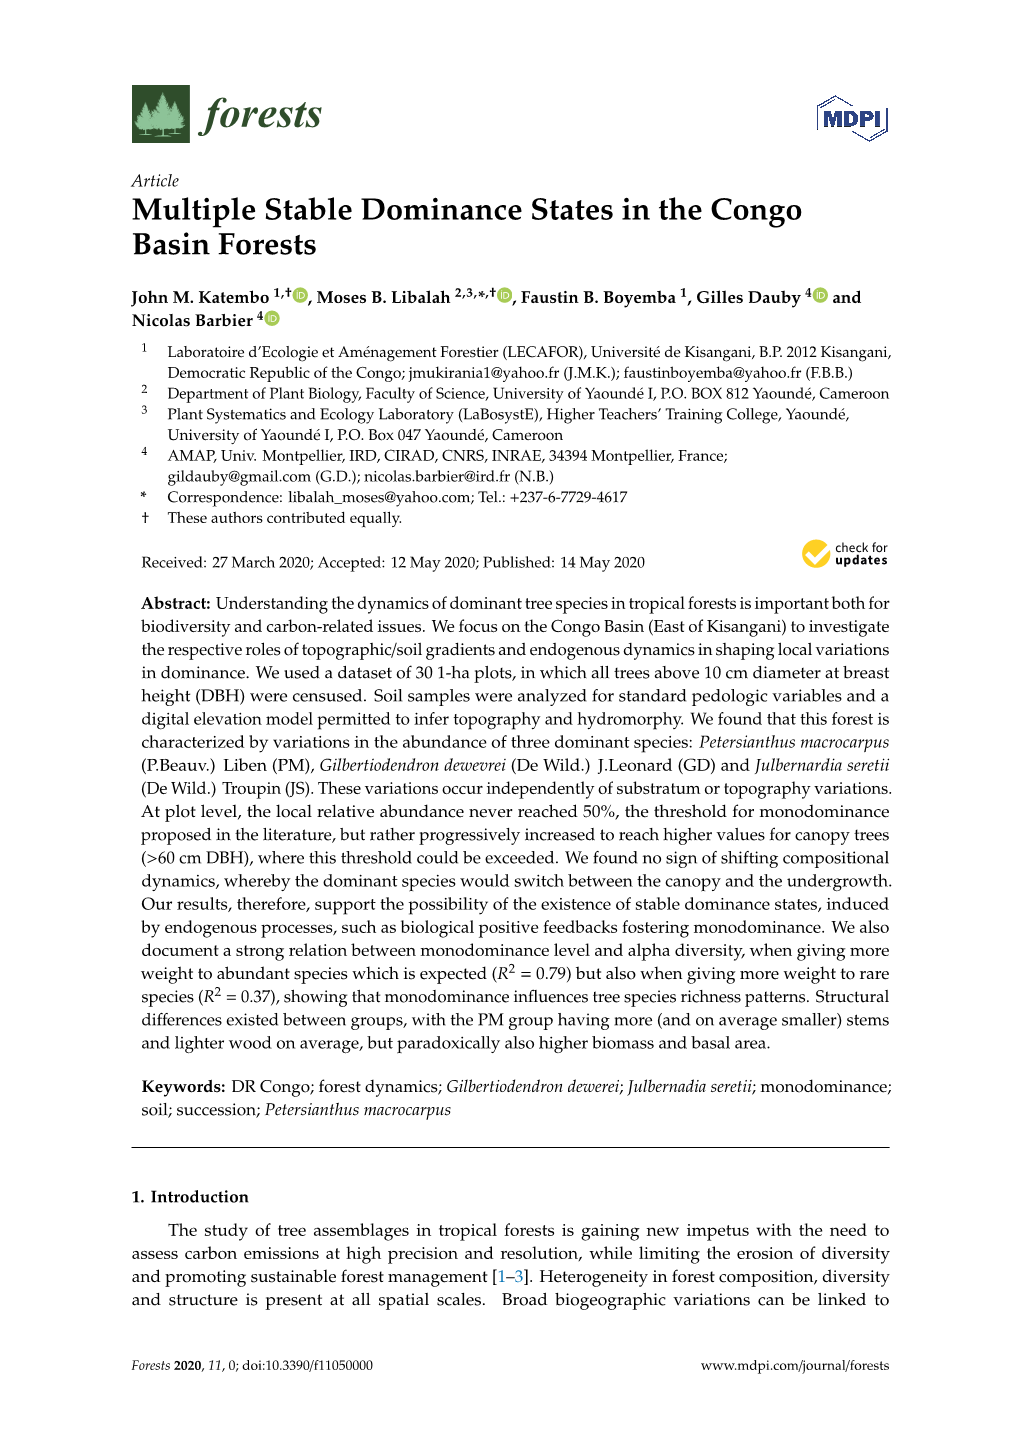 Multiple Stable Dominance States in the Congo Basin Forests